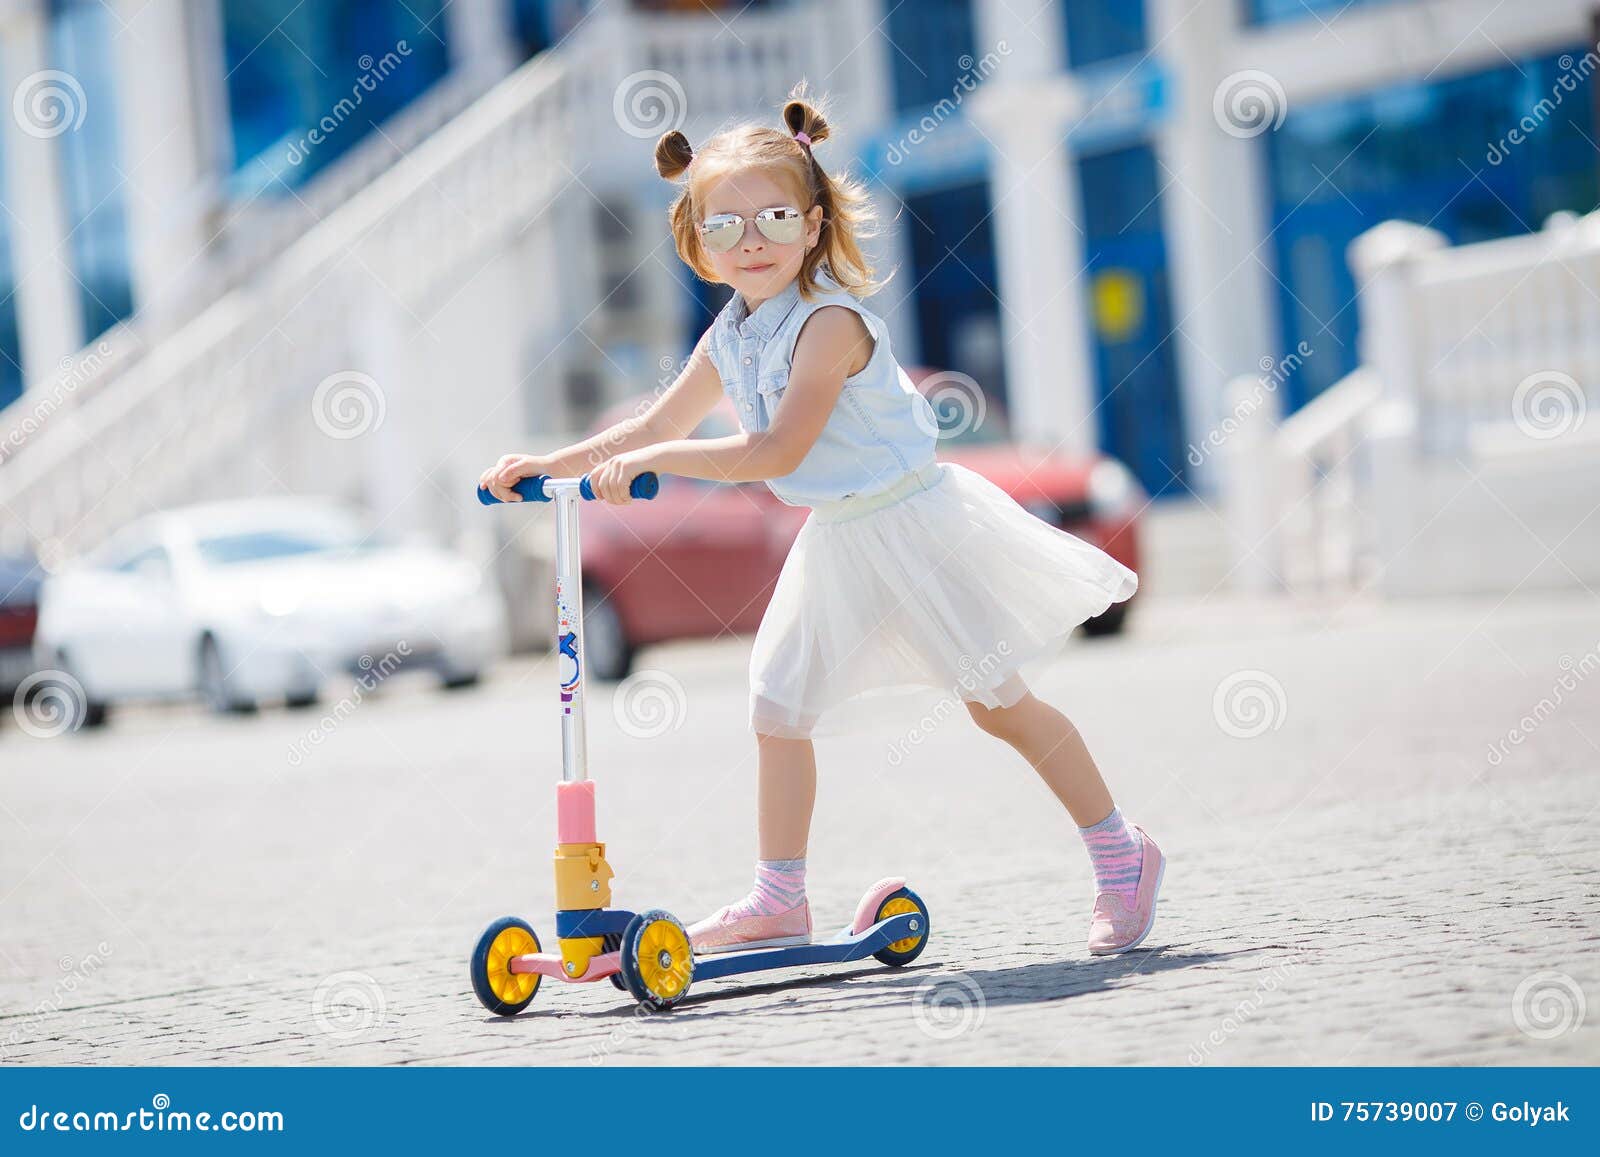 little girl riding scooter